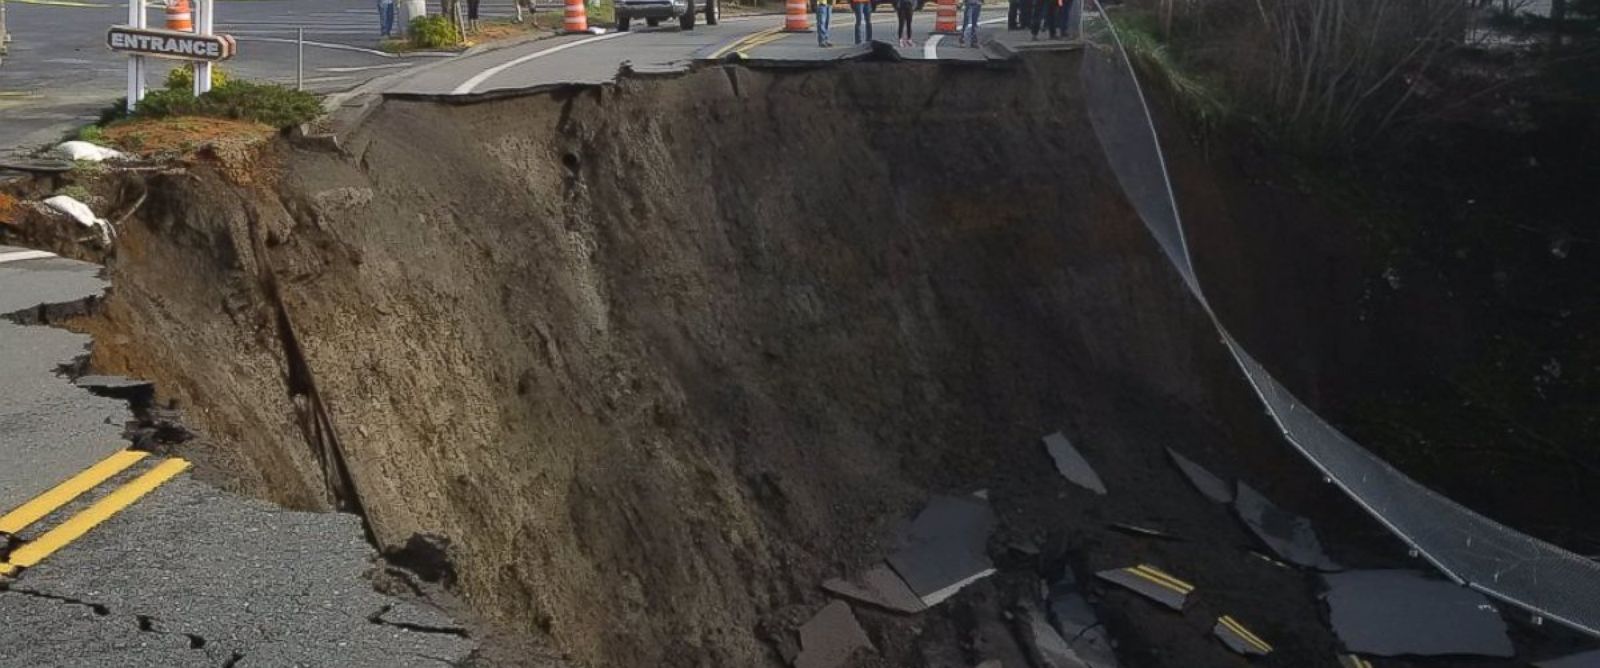 Oregon DOT posted this photo on their Twitter page with this caption: A south view of the #Harbor #sinkhole located west of U.S. 101. A detour goes into effect at 9 p.m. tonight, " Jan. 28, 2016.